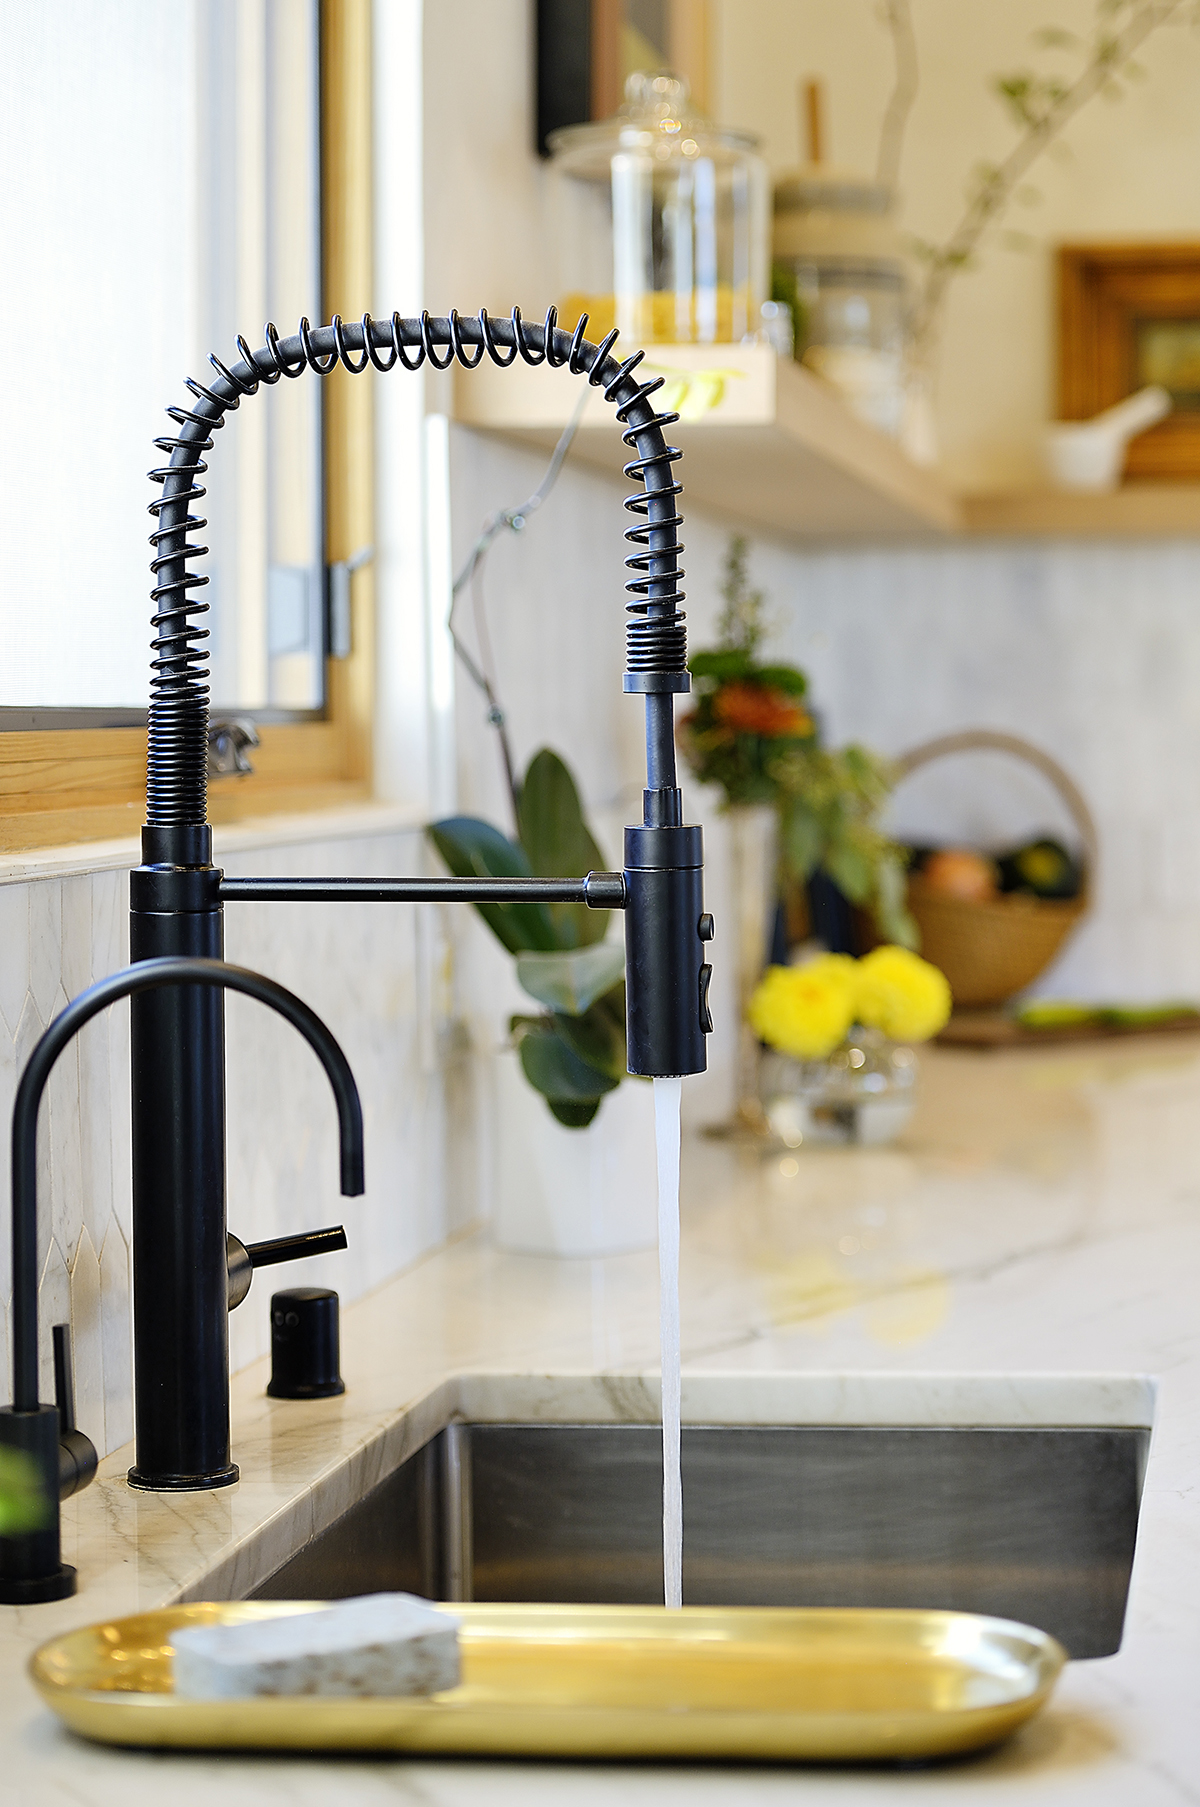 A kitchen sink with a black faucet and a gold tray designed by an architect.